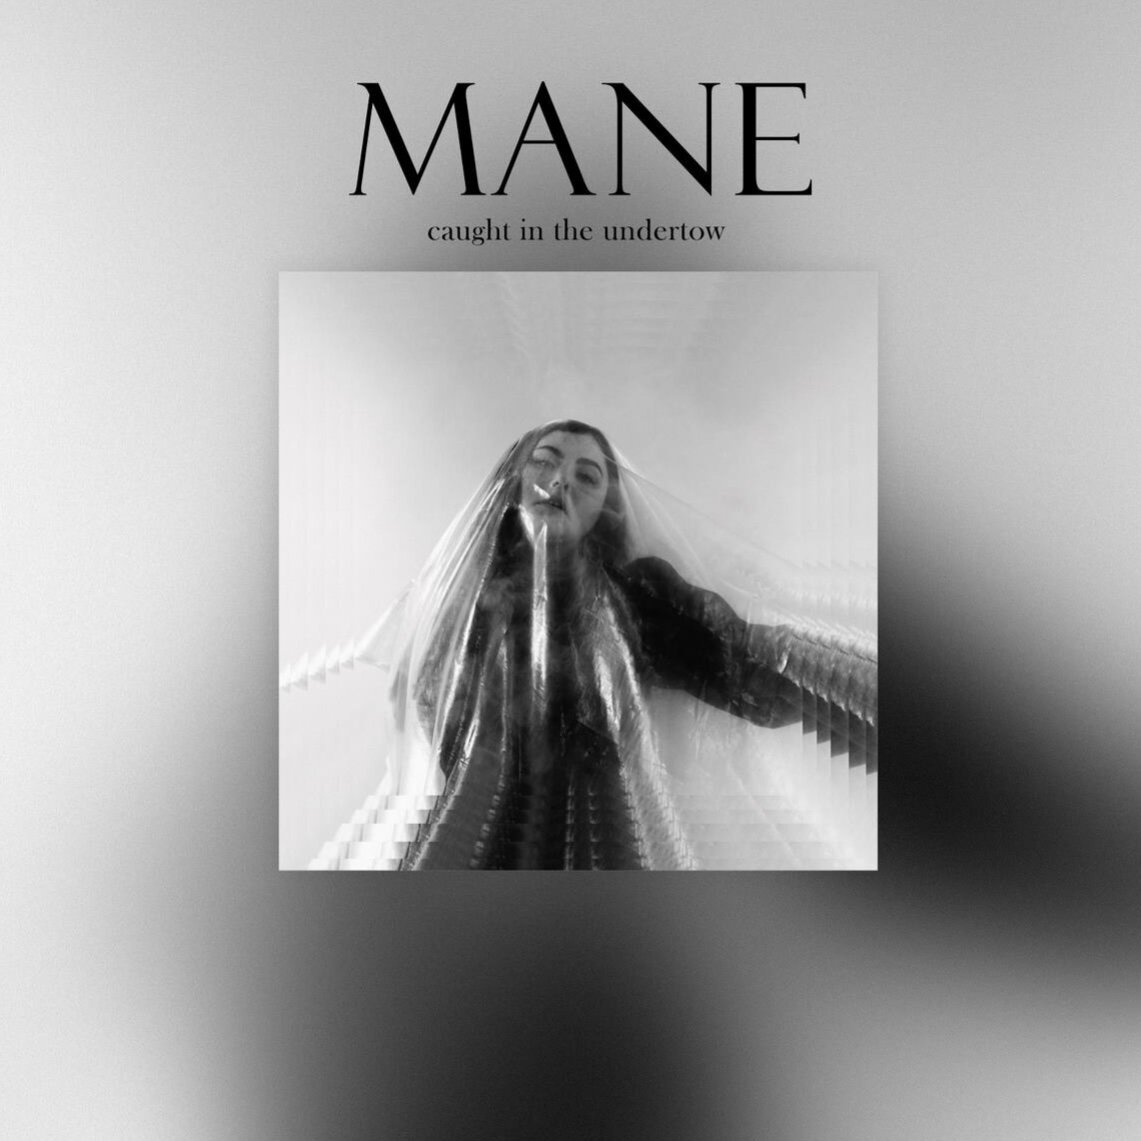 @mane.music's beautifully heart-wrenching sophomore EP 'Caught In The Undertow' is out now! 🌊💙

Drawing inspiration from the track 'Breathing Again', the EP title 'Caught In The Undertow' captures the essence of hope and healing amid life's tumultu